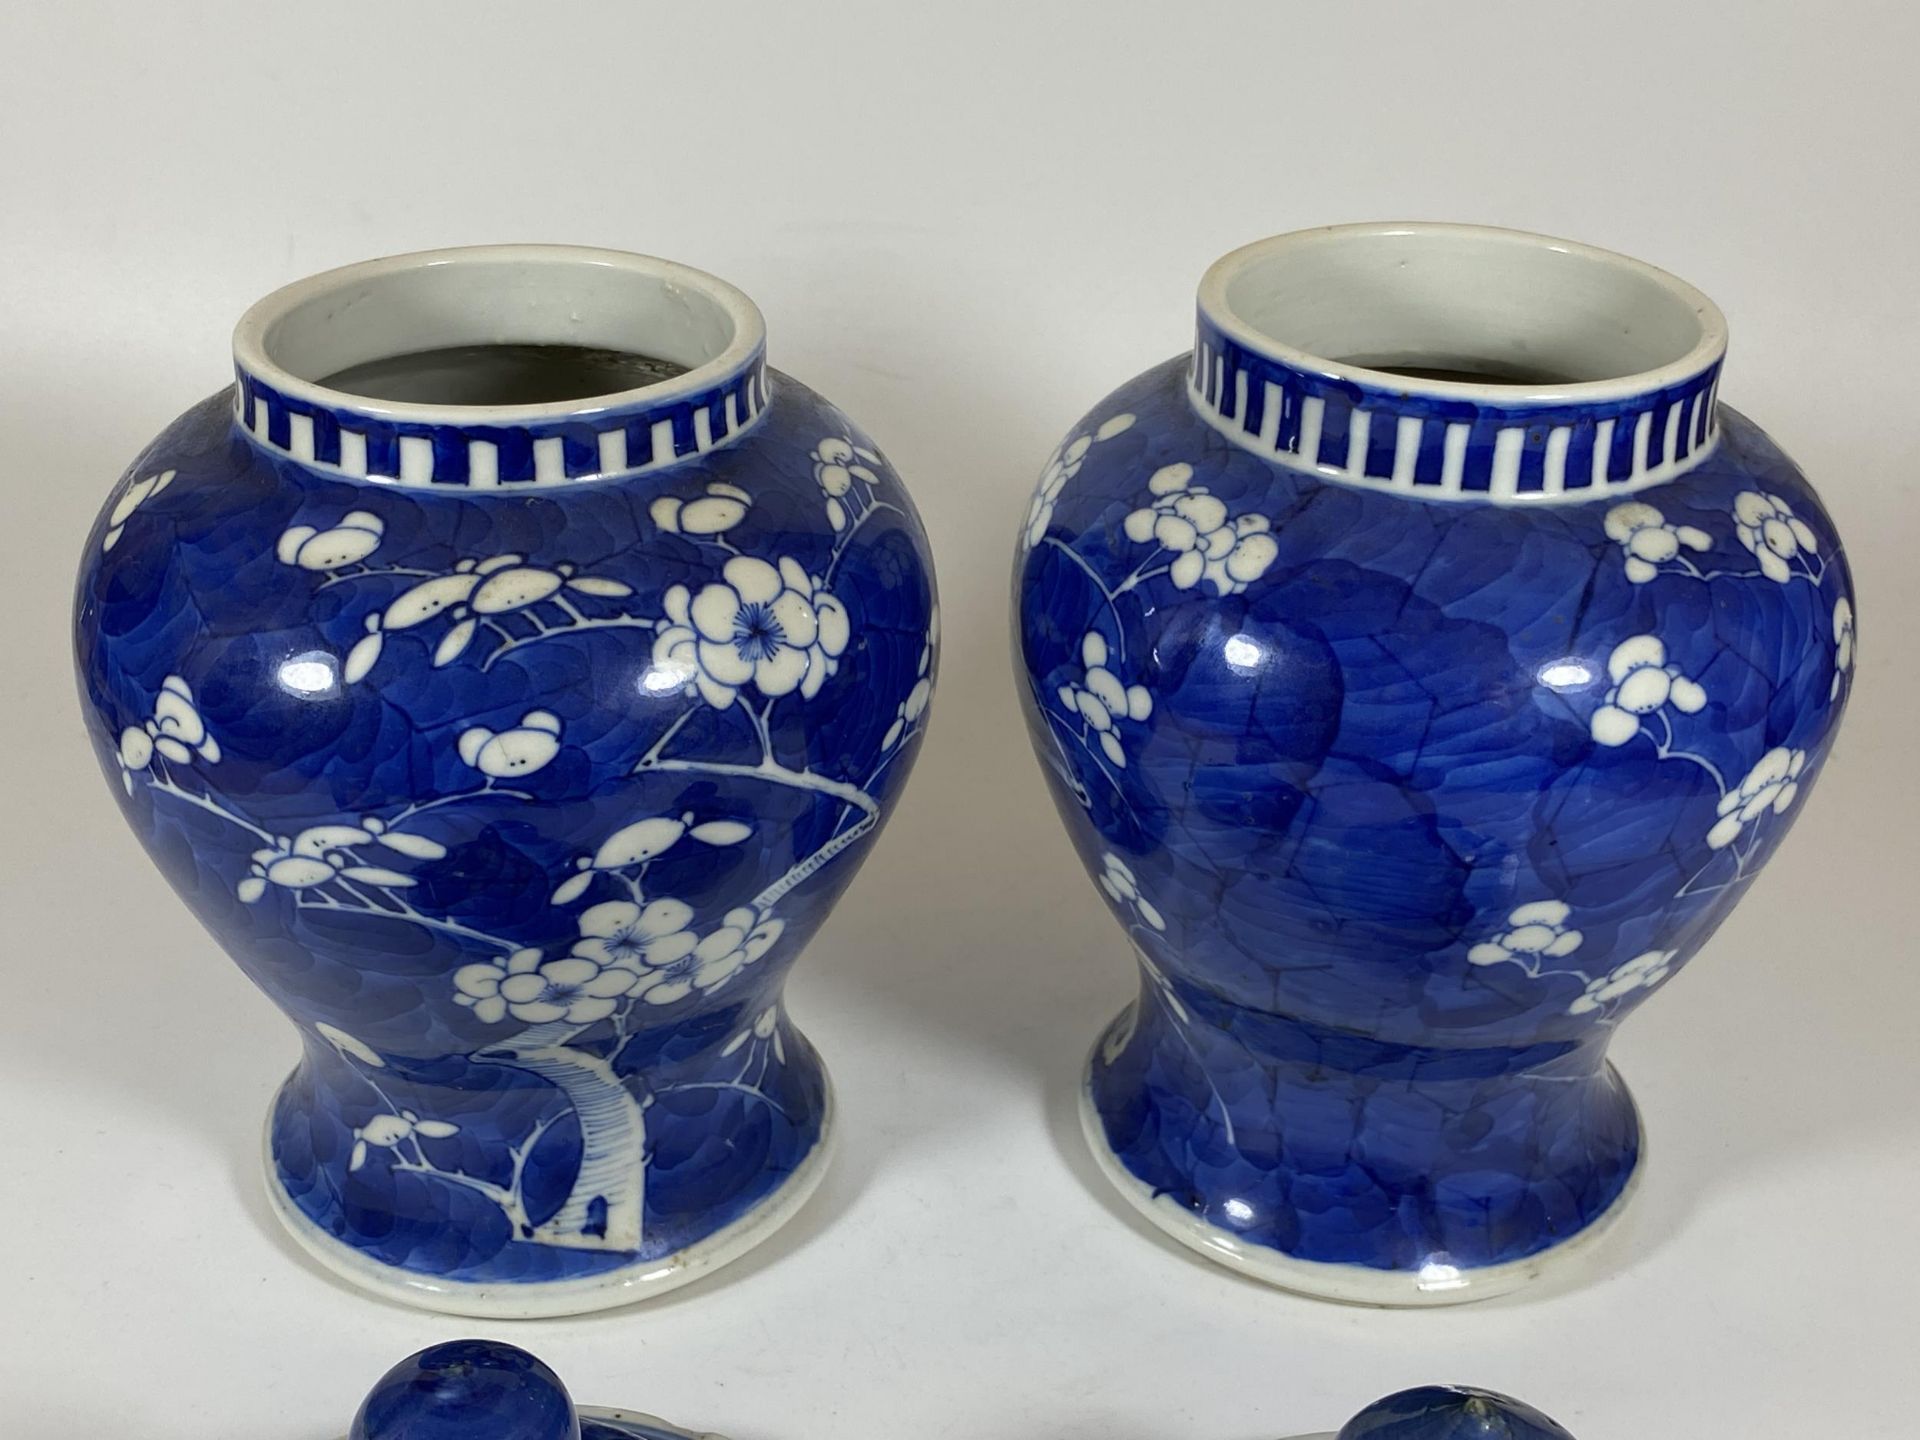 A PAIR OF 19TH/20TH CENTURY CHINESE BLUE AND WHITE PRUNUS BLOSSOM PATTERN PORCELAIN LIDDED TEMPLE - Image 7 of 11